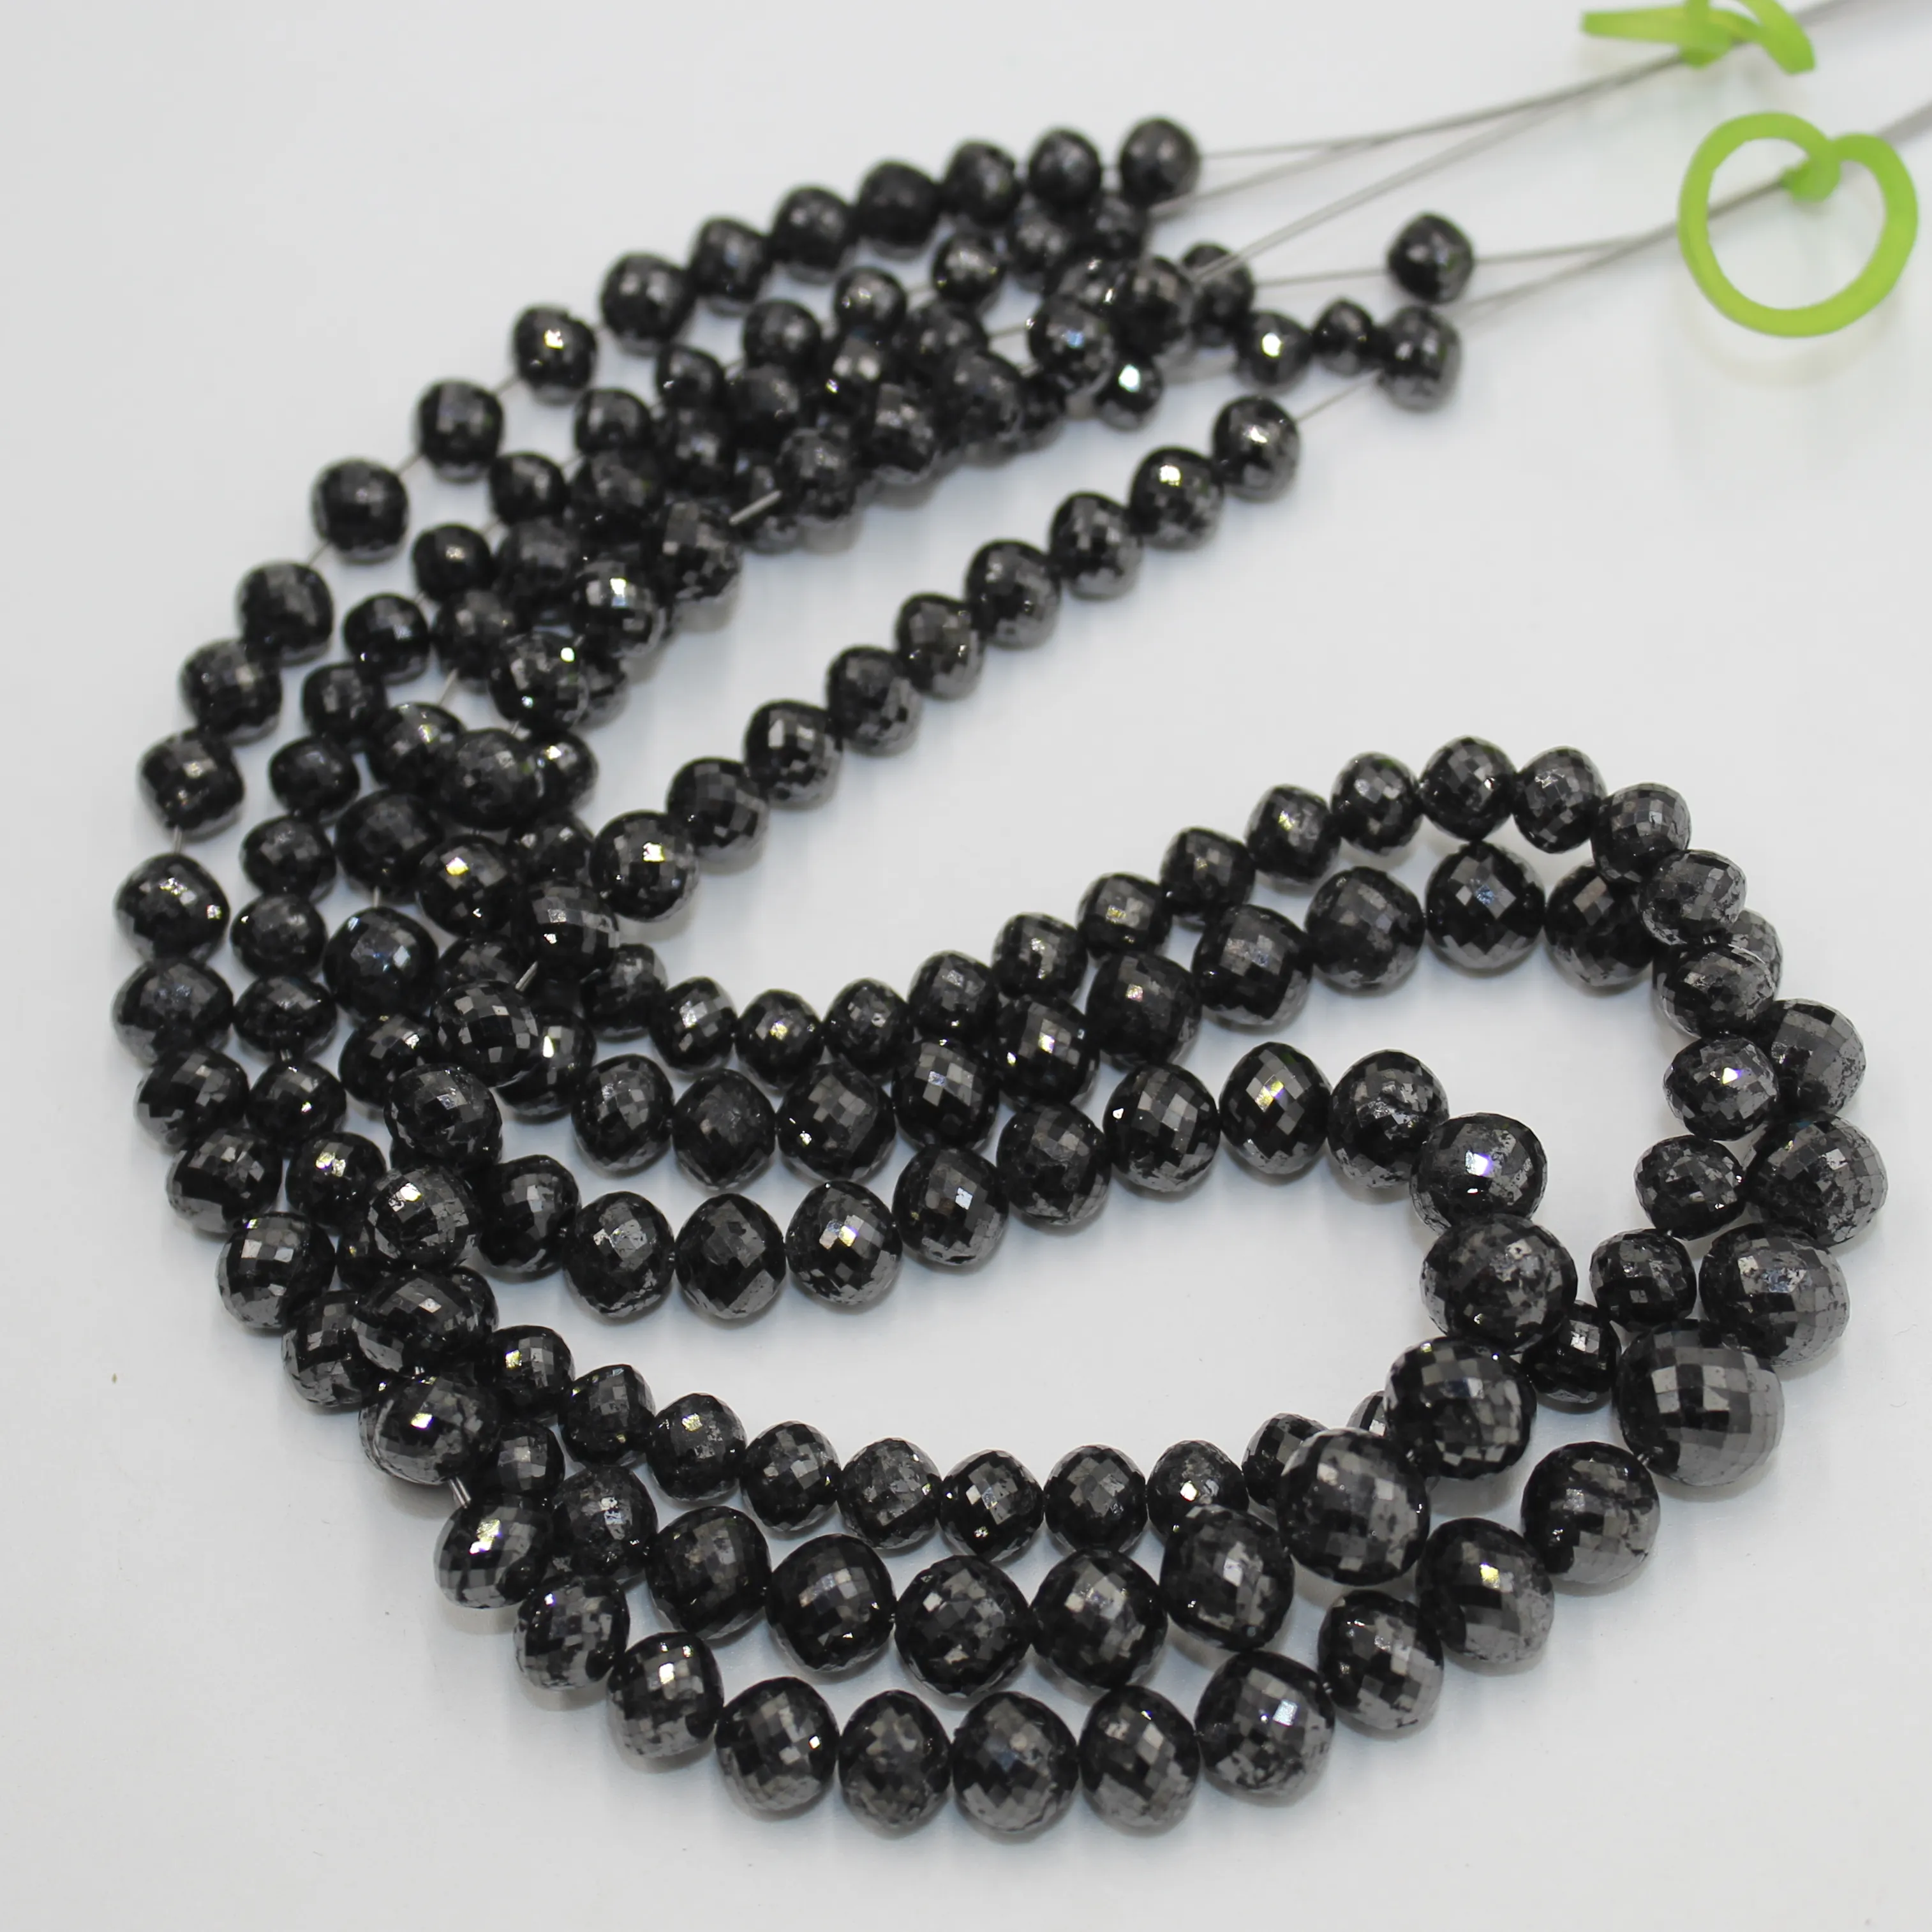 2mm Natural Black Diamond Stone Faceted Rondelle Gemstone Beads Strand From Wholesaler at Factory Price